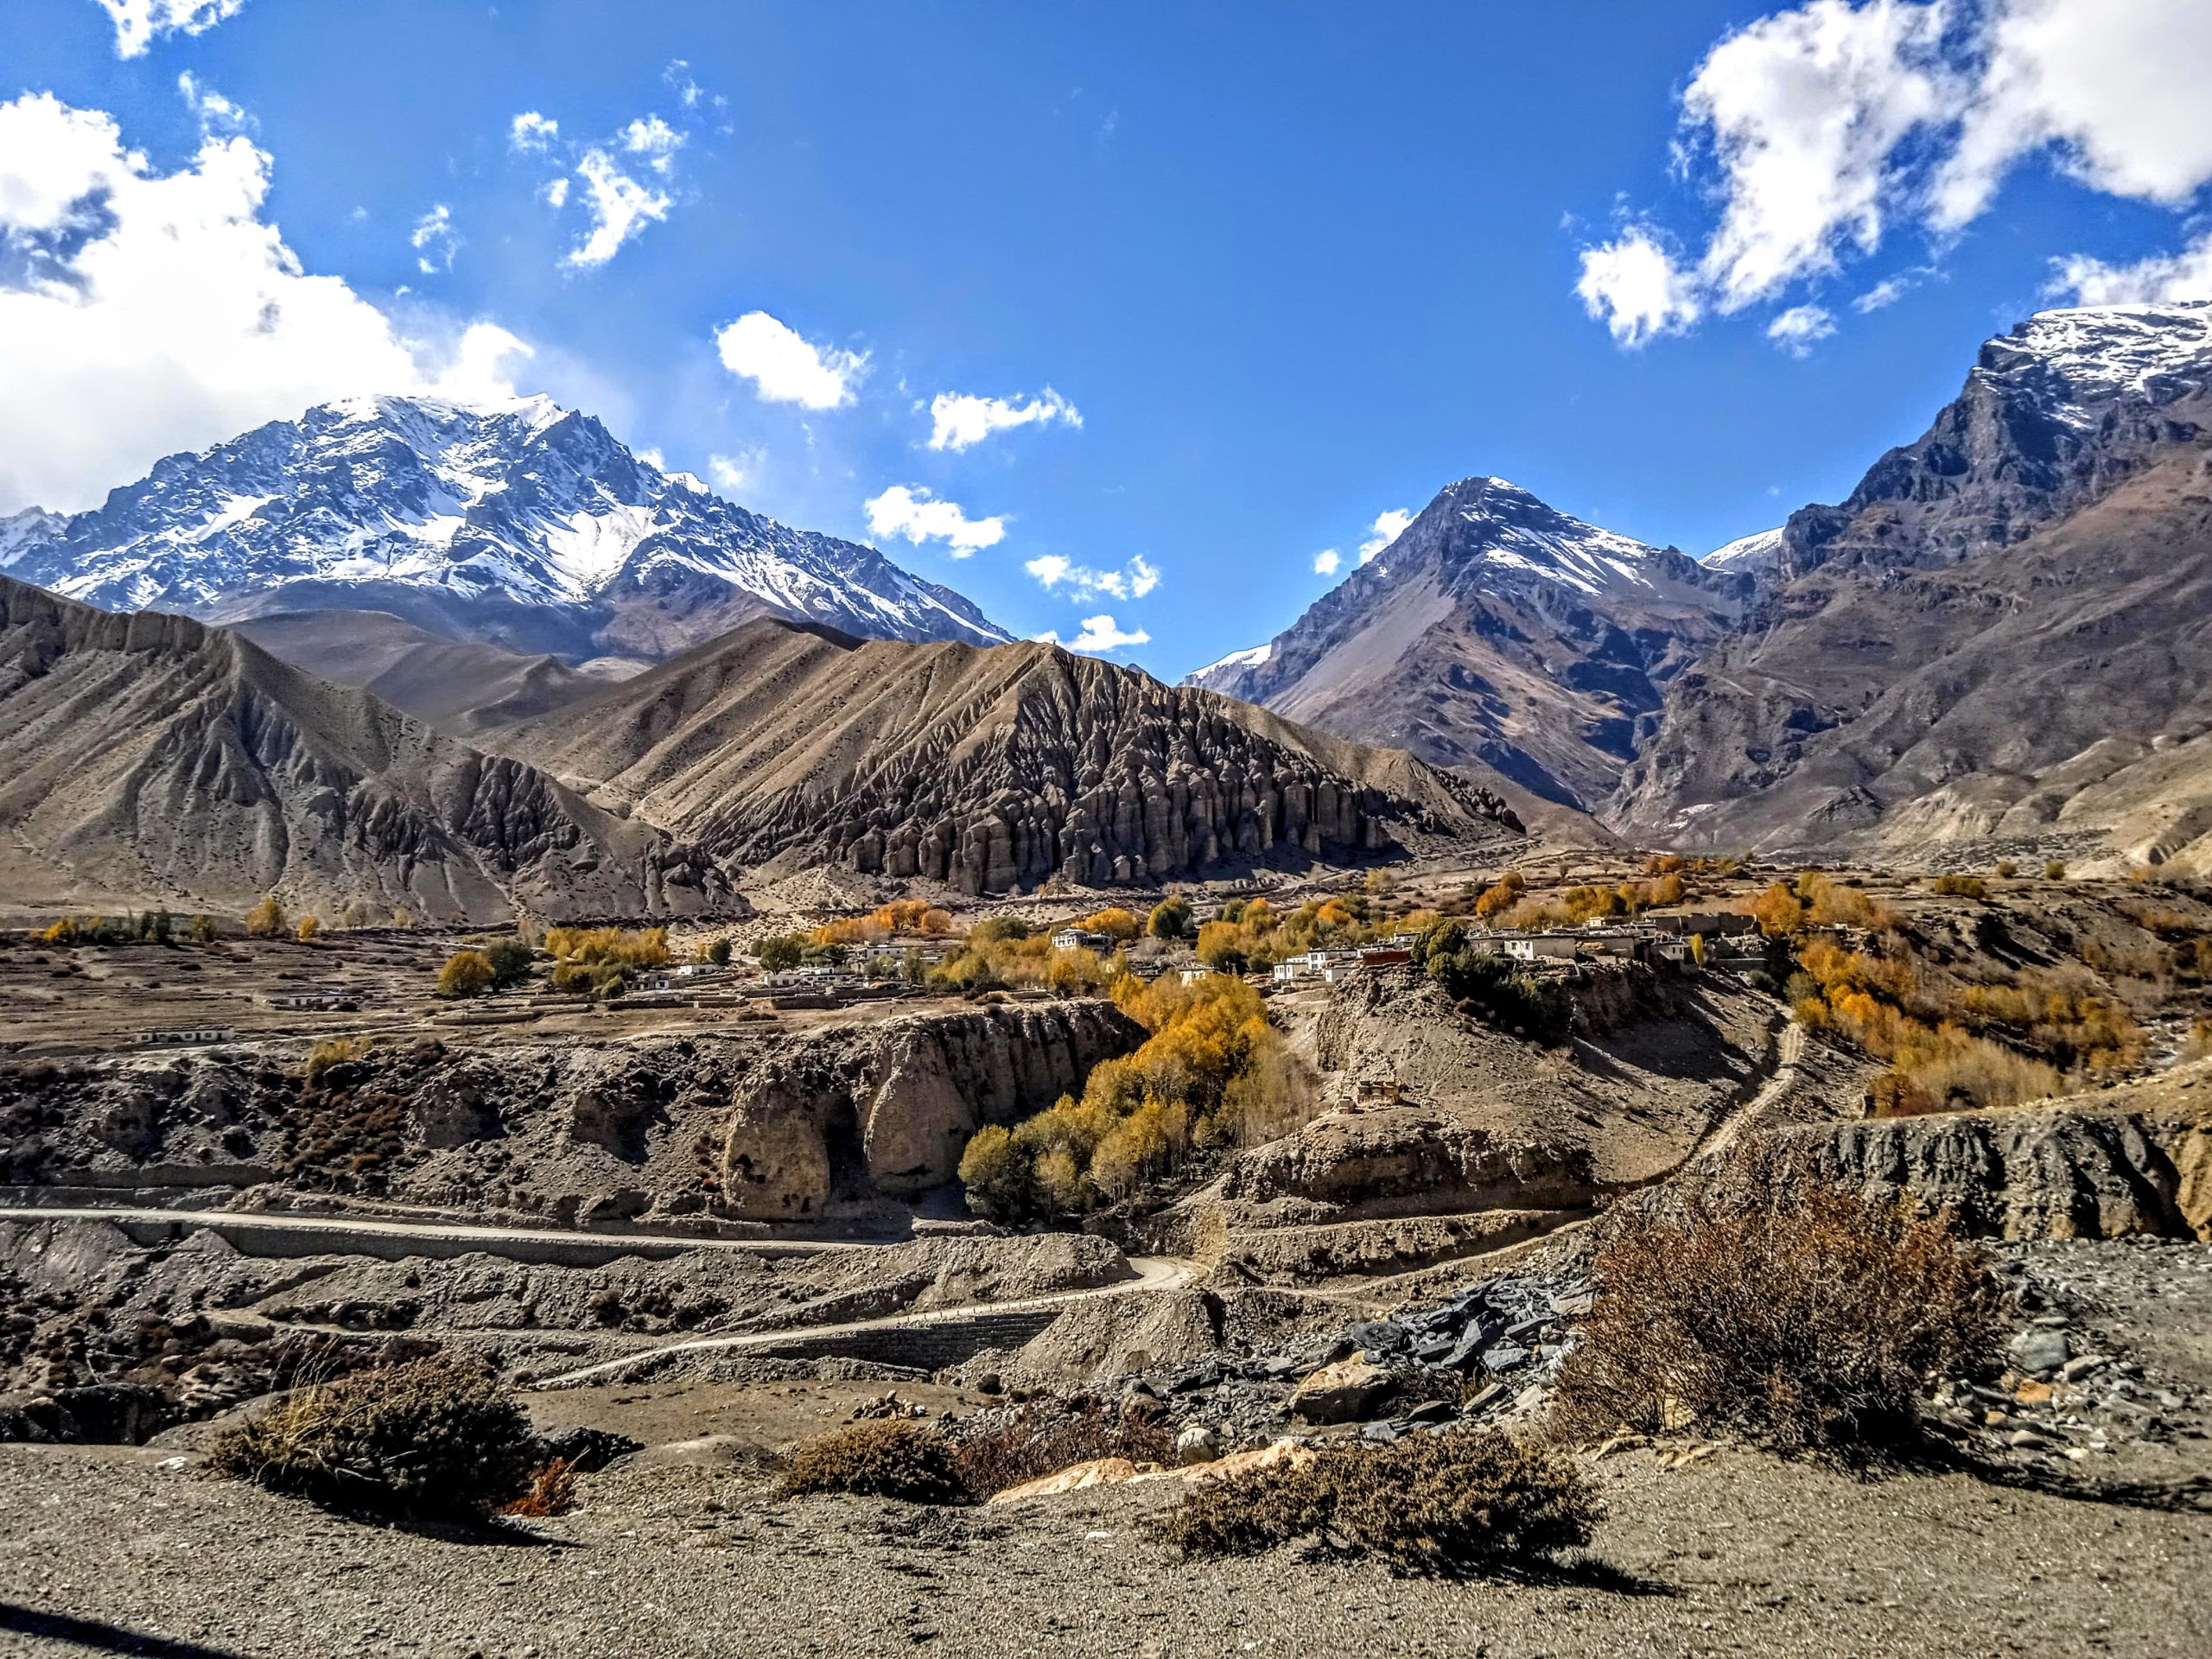 Discovering the Mystical Kingdom of Lo: A Trek Through Upper Mustang